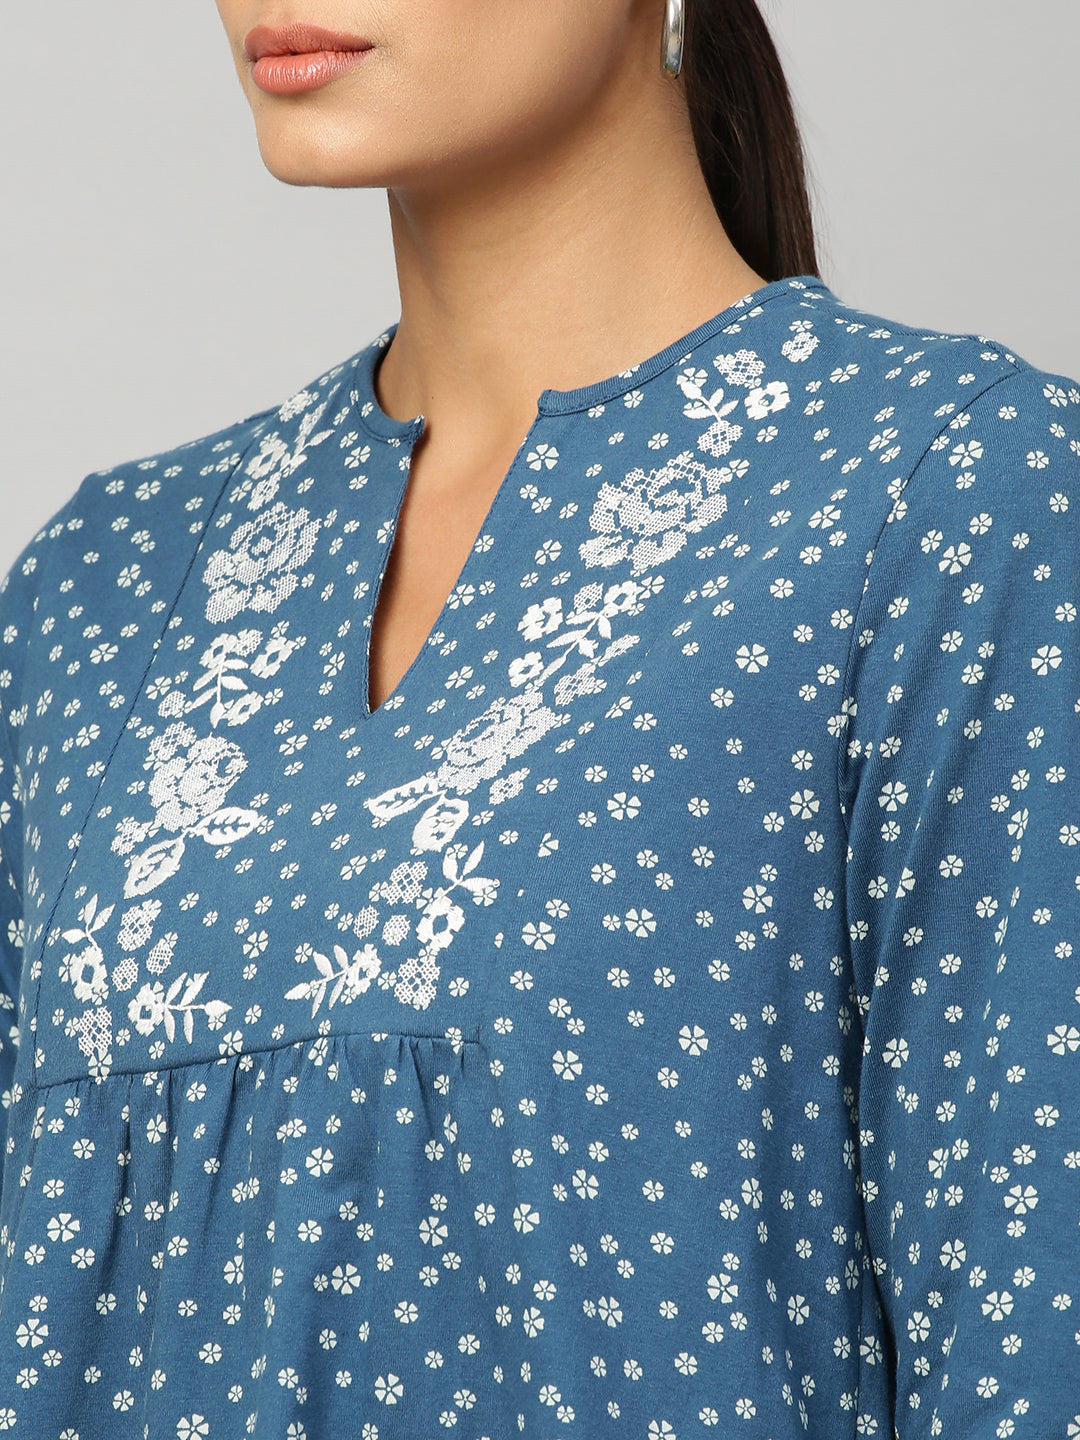 Embroidered Printed Jersey Tunic Top